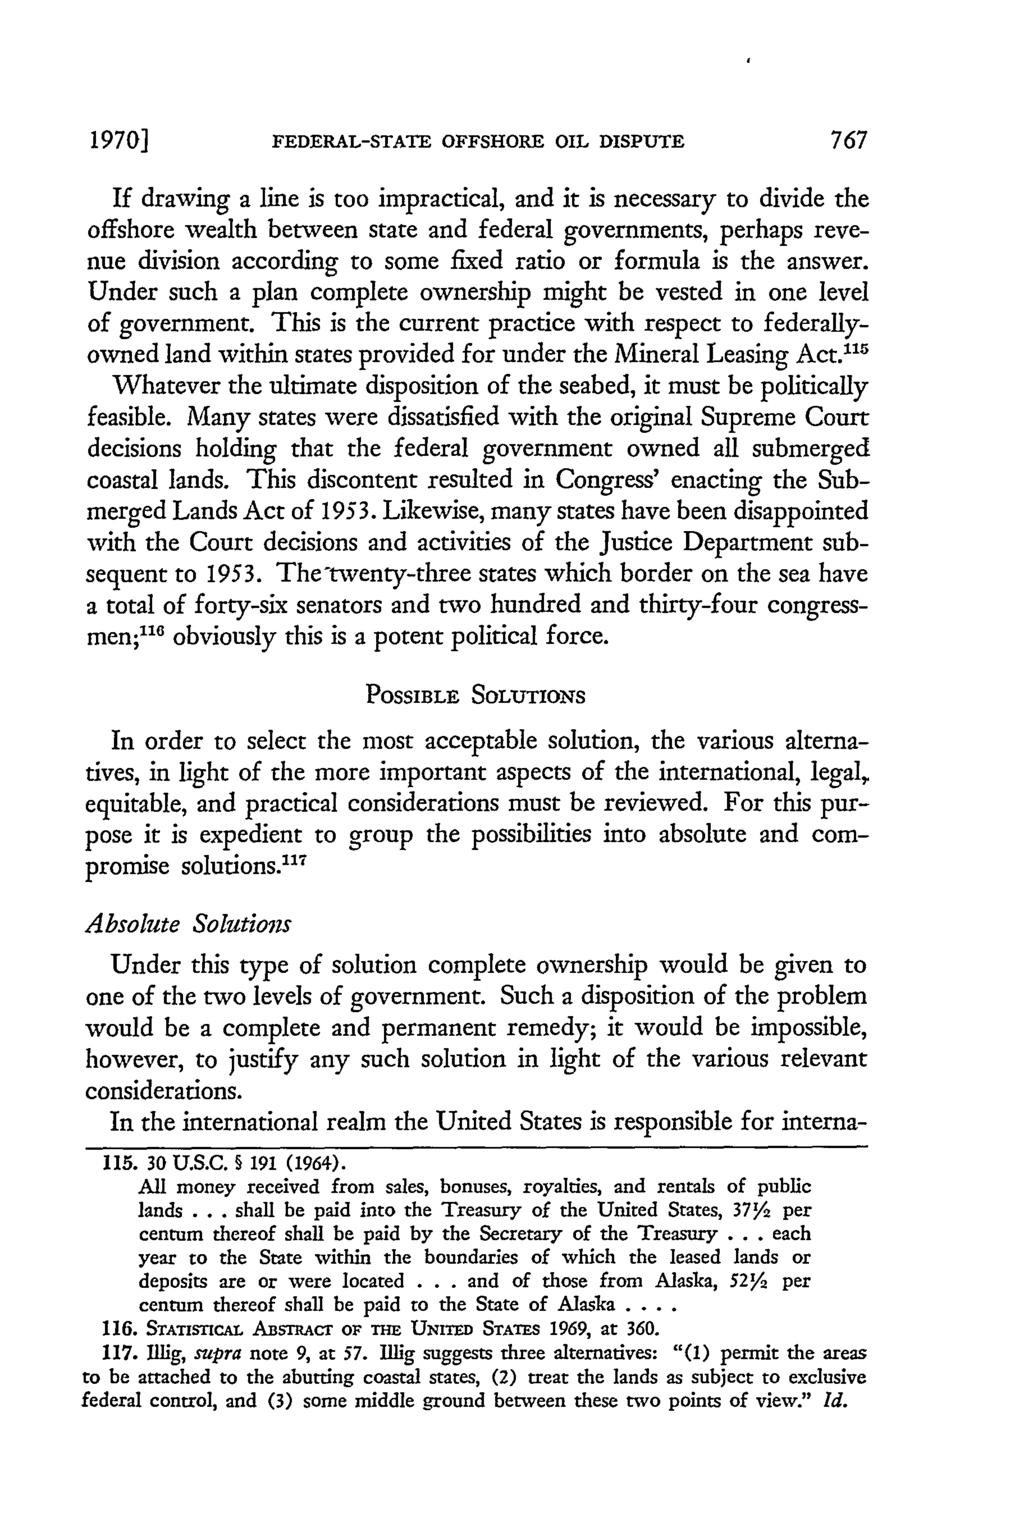 1970] FEDERAL-STATE OFFSHORE OIL DISPUTE If drawing a line is too impractical, and it is necessary to divide the offshore wealth between state and federal governments, perhaps revenue division